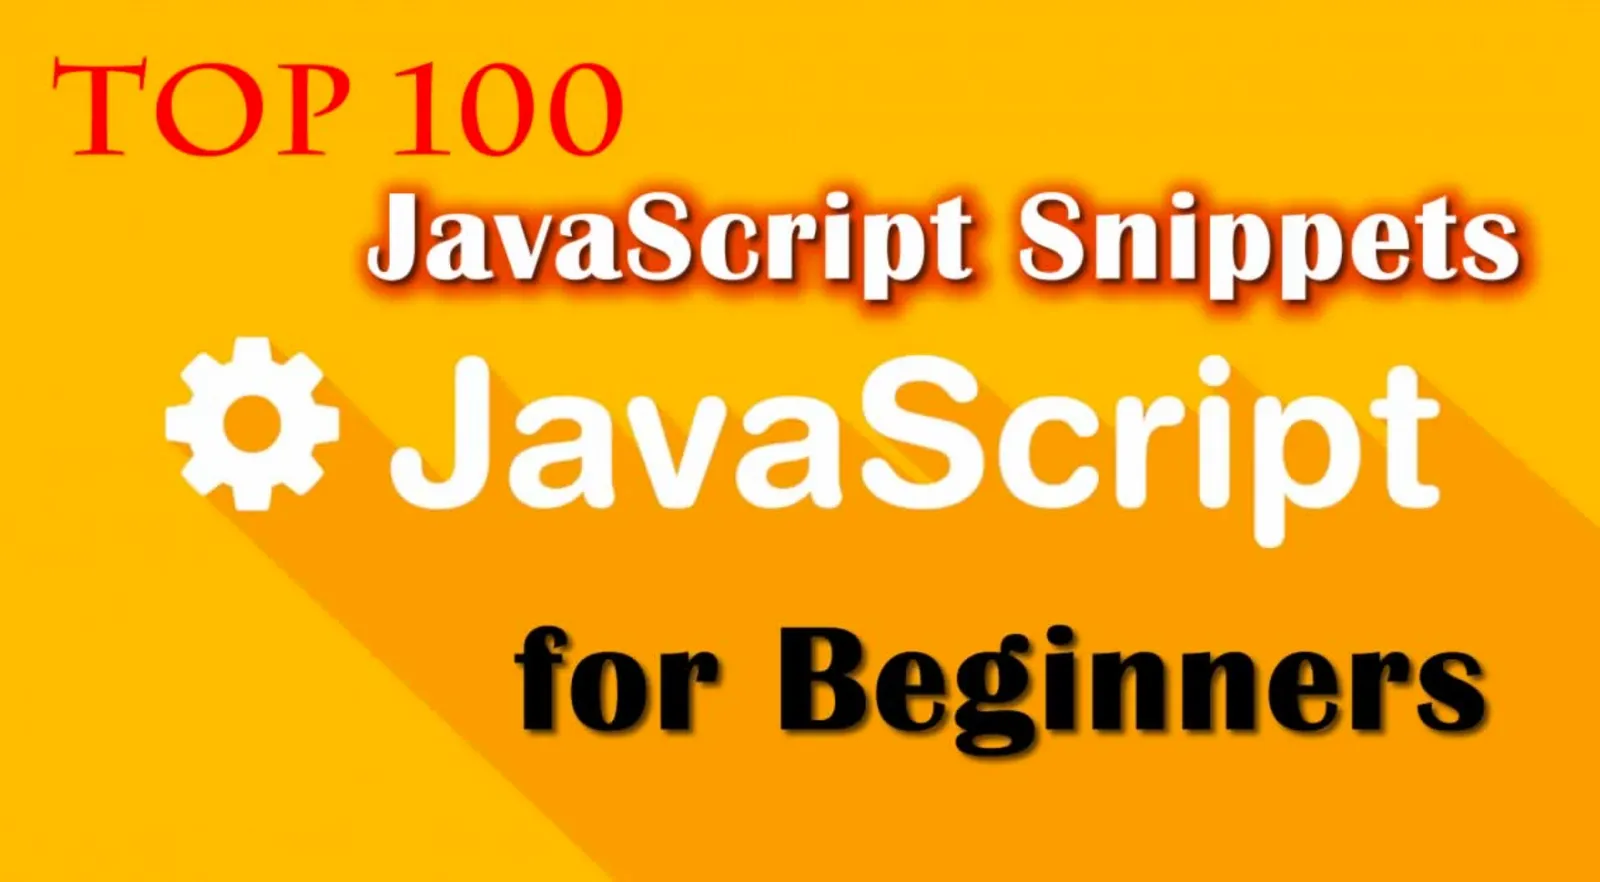 Top 100 JavaScript Snippets for Beginners 